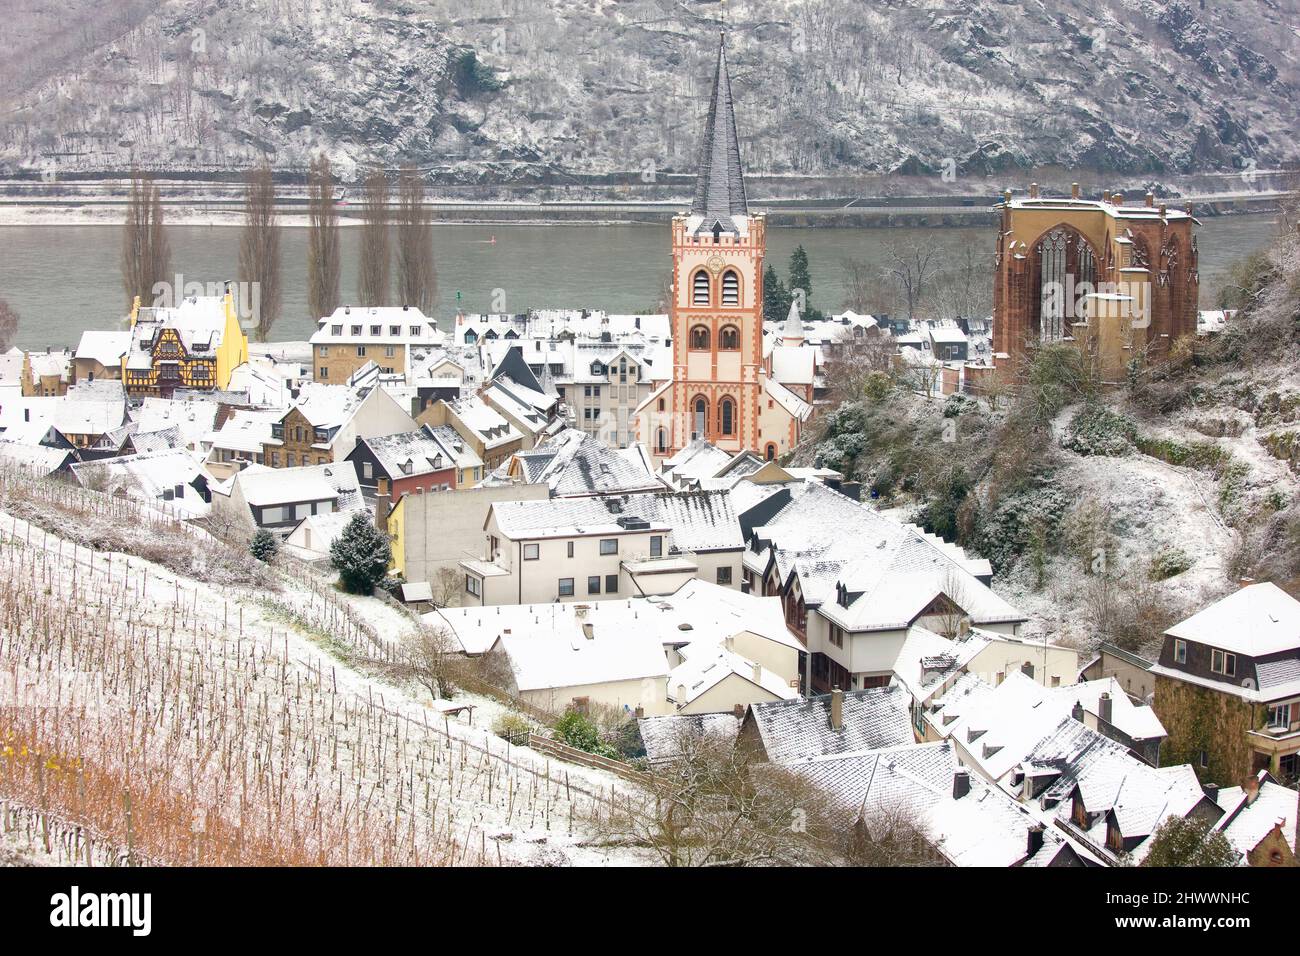 Overview of Bacharach and surrounding Vineyards in winter, Rhineland-Palatinate, Germany Stock Photo